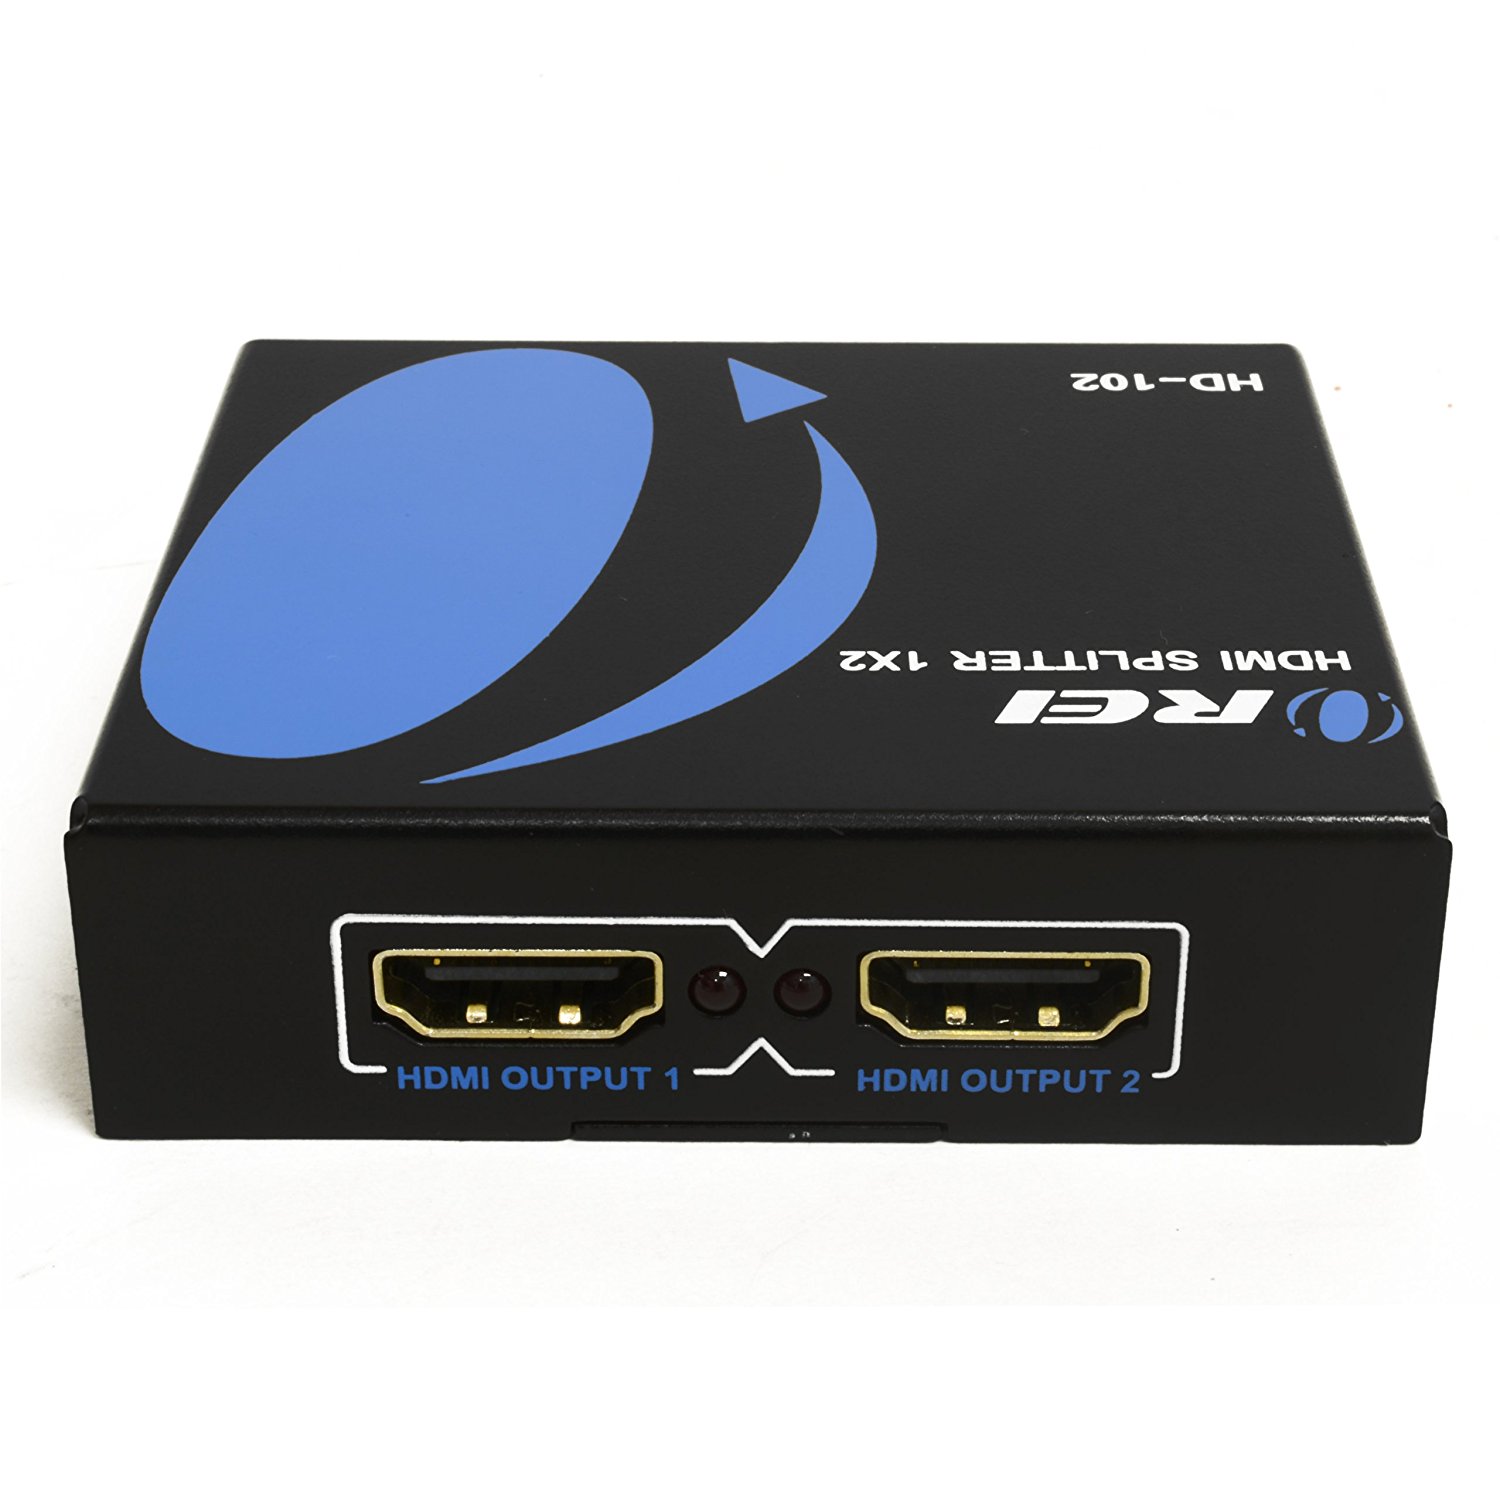 OREI HD-102 1x2 1 Port HDMI Powered Splitter Ver 1.3 Certified for Full HD 1080P & 3D Support (One Input To Two Outputs)